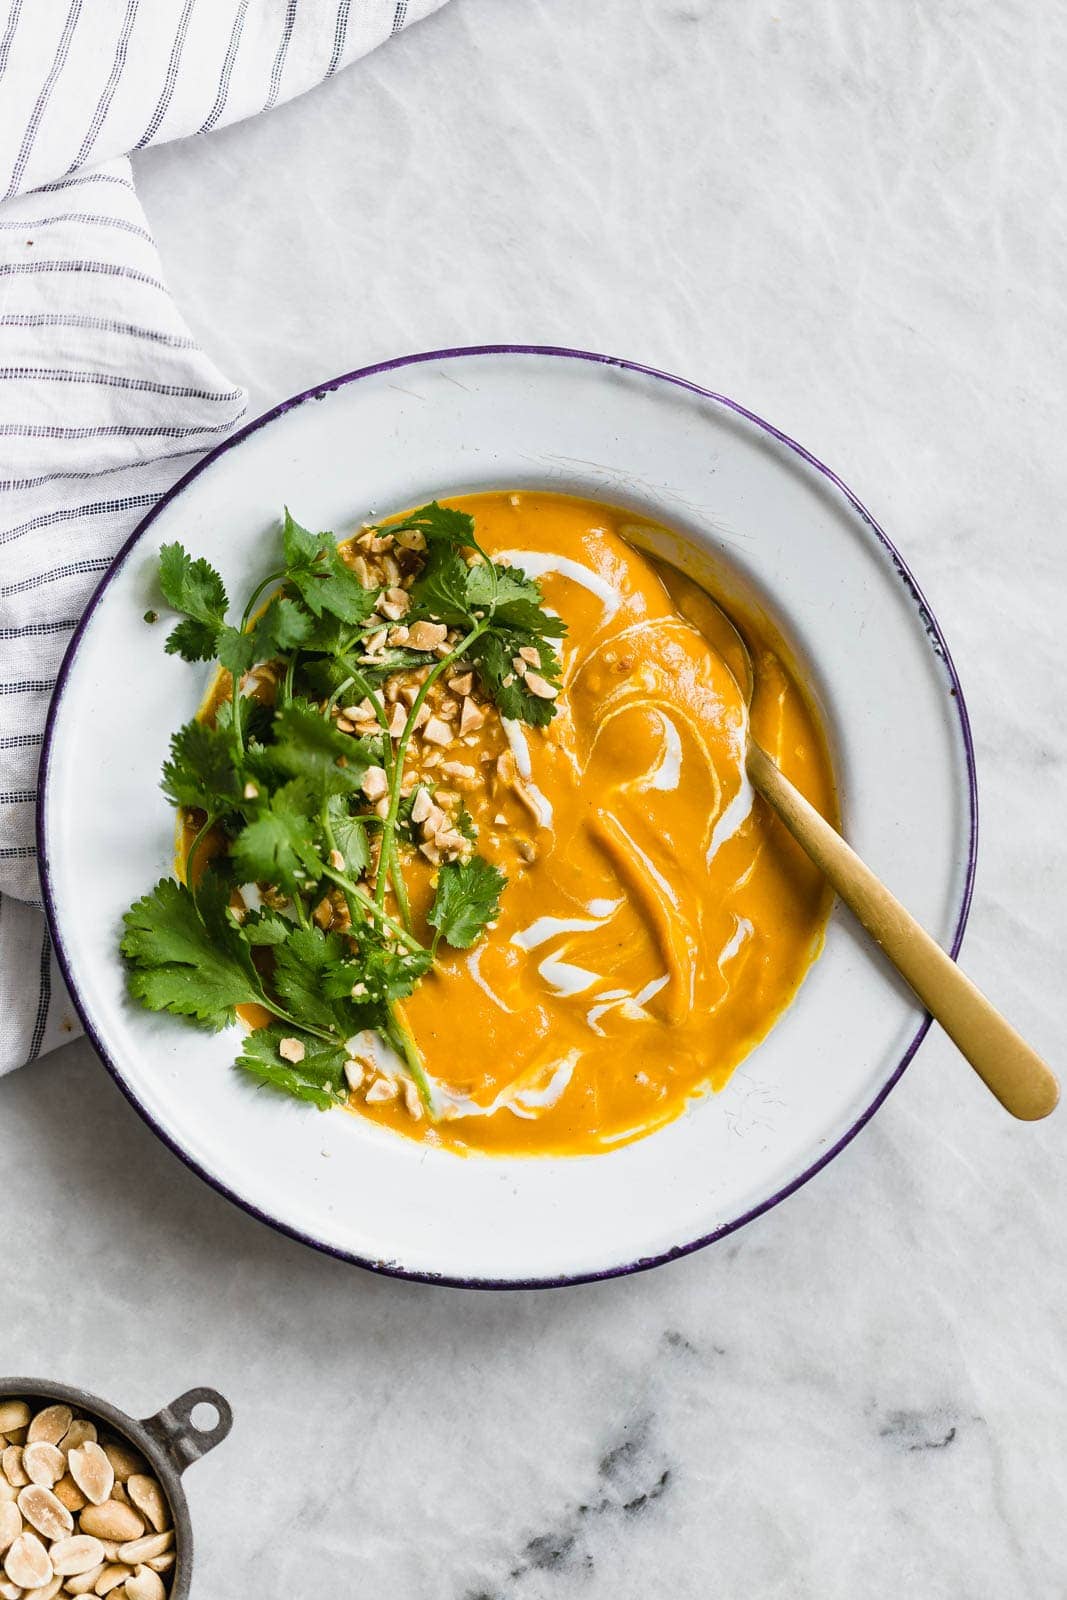 Vegan Turmeric Carrot Ginger Soup topped with cilantro and peanuts